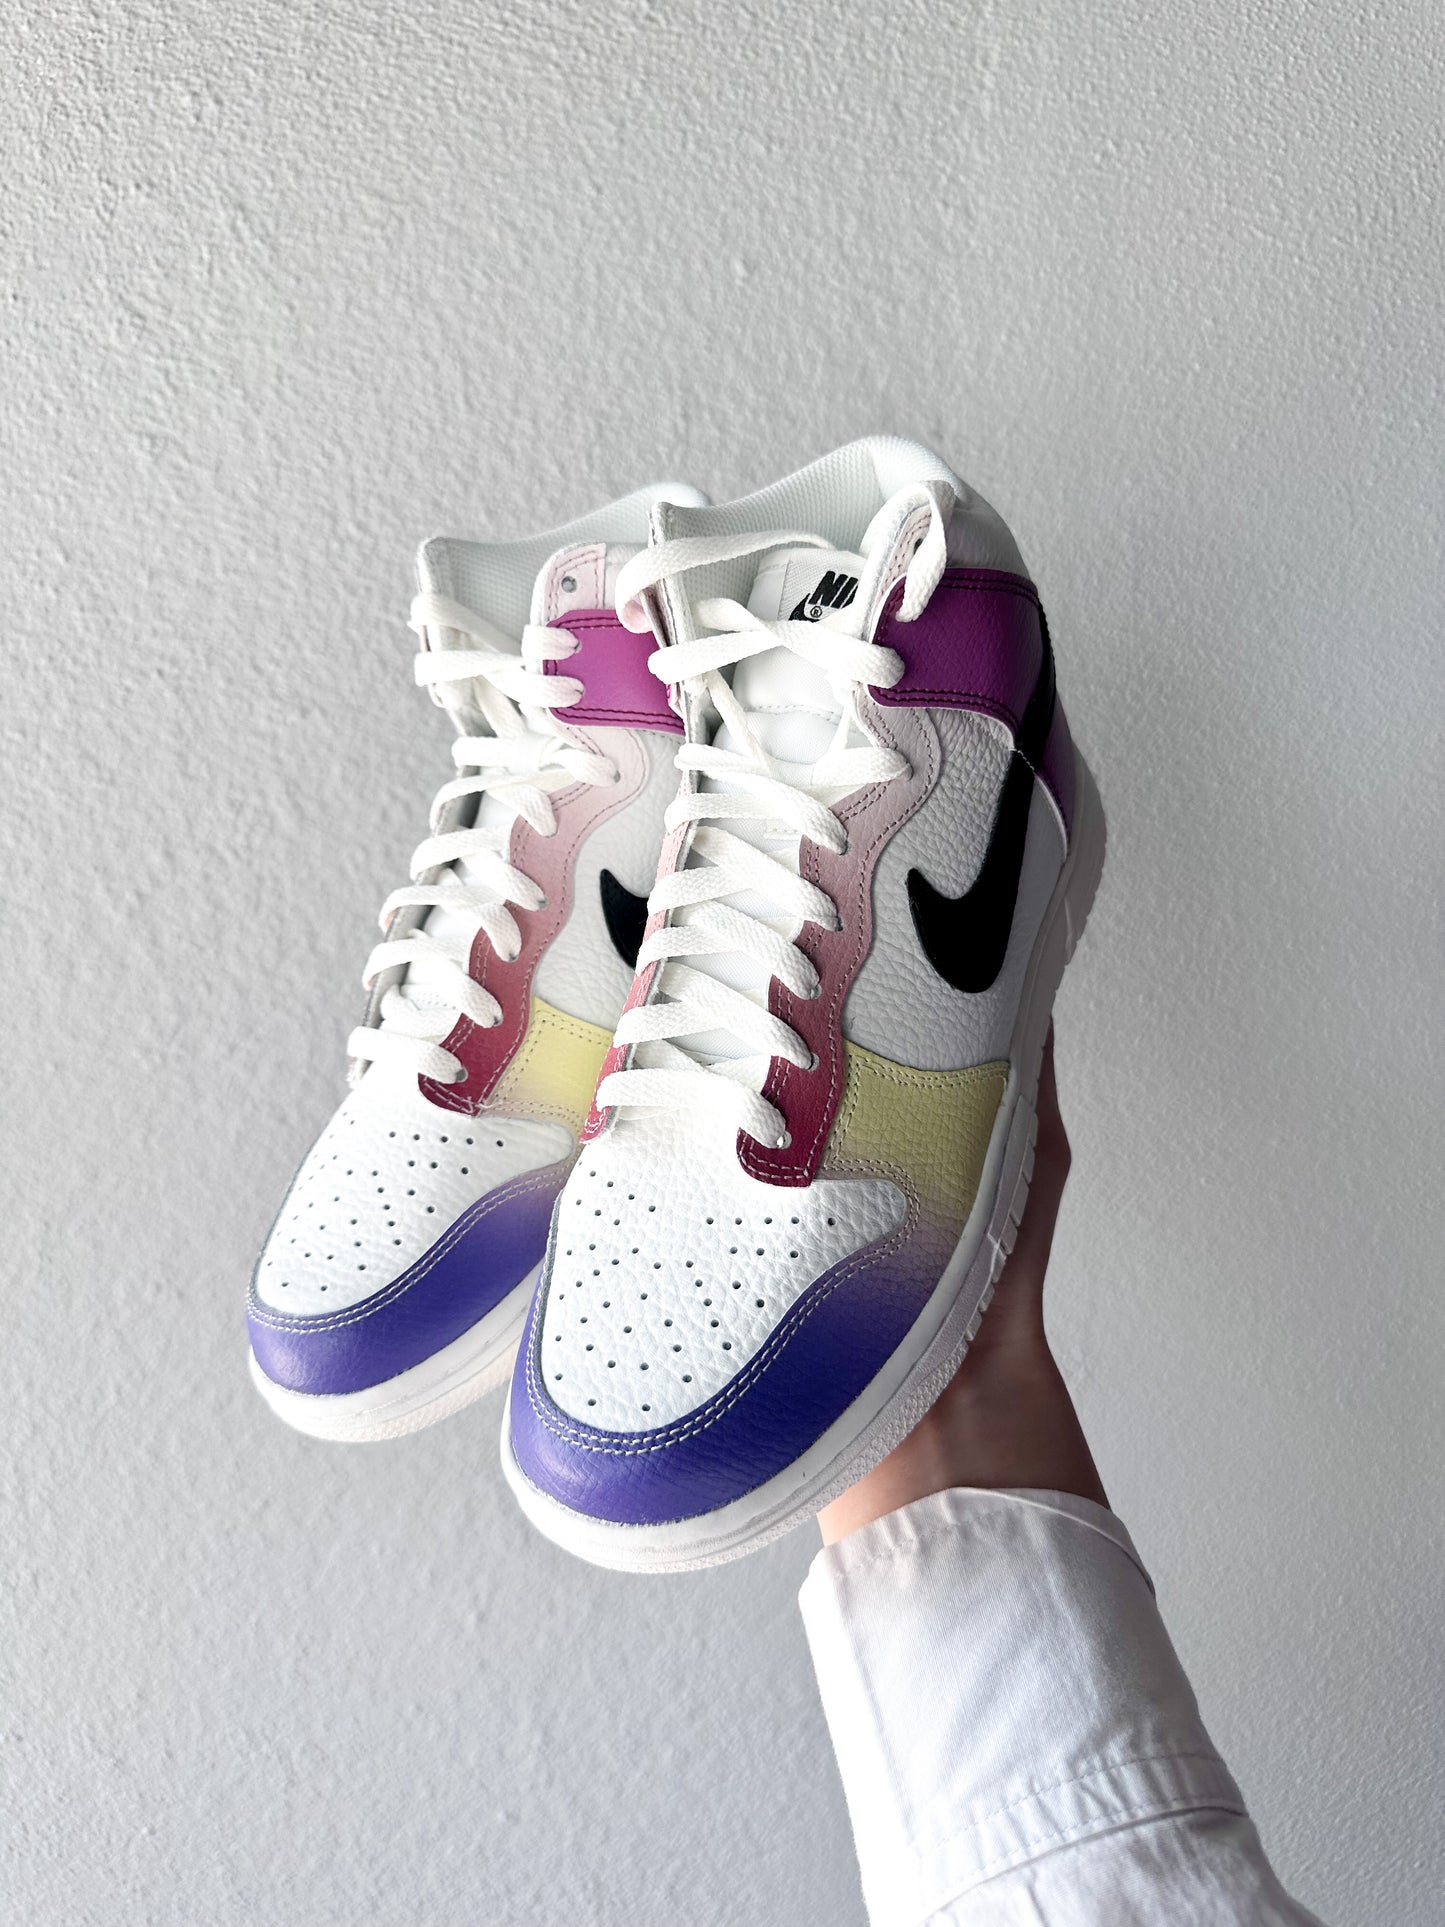 Nike Dunk High Multi-Color Gradient (W)